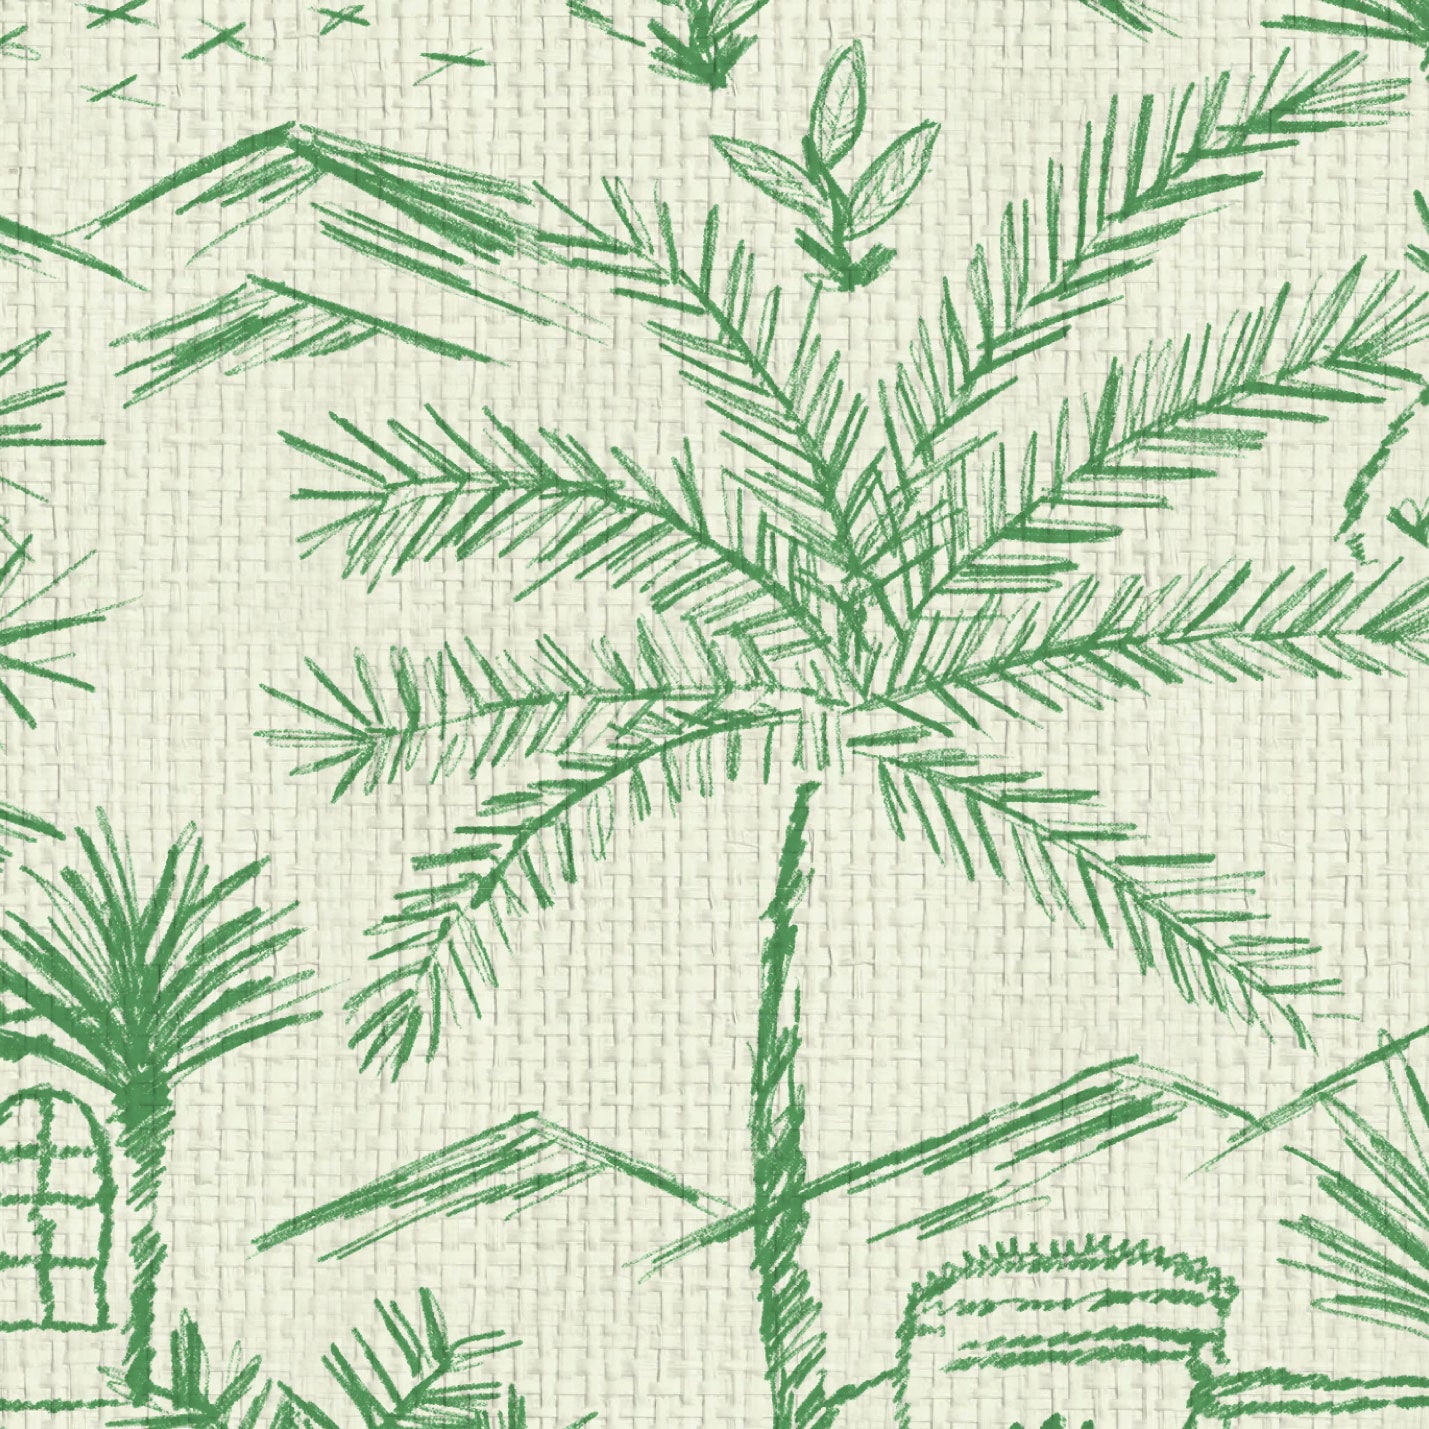 Paperweave paper weave printed modern toile design featuring a 2 color print with Spanish style houses, variety of palm trees and tropical and desert inspired plants, massive pools, vintage cars and fountains with mountains in the background.